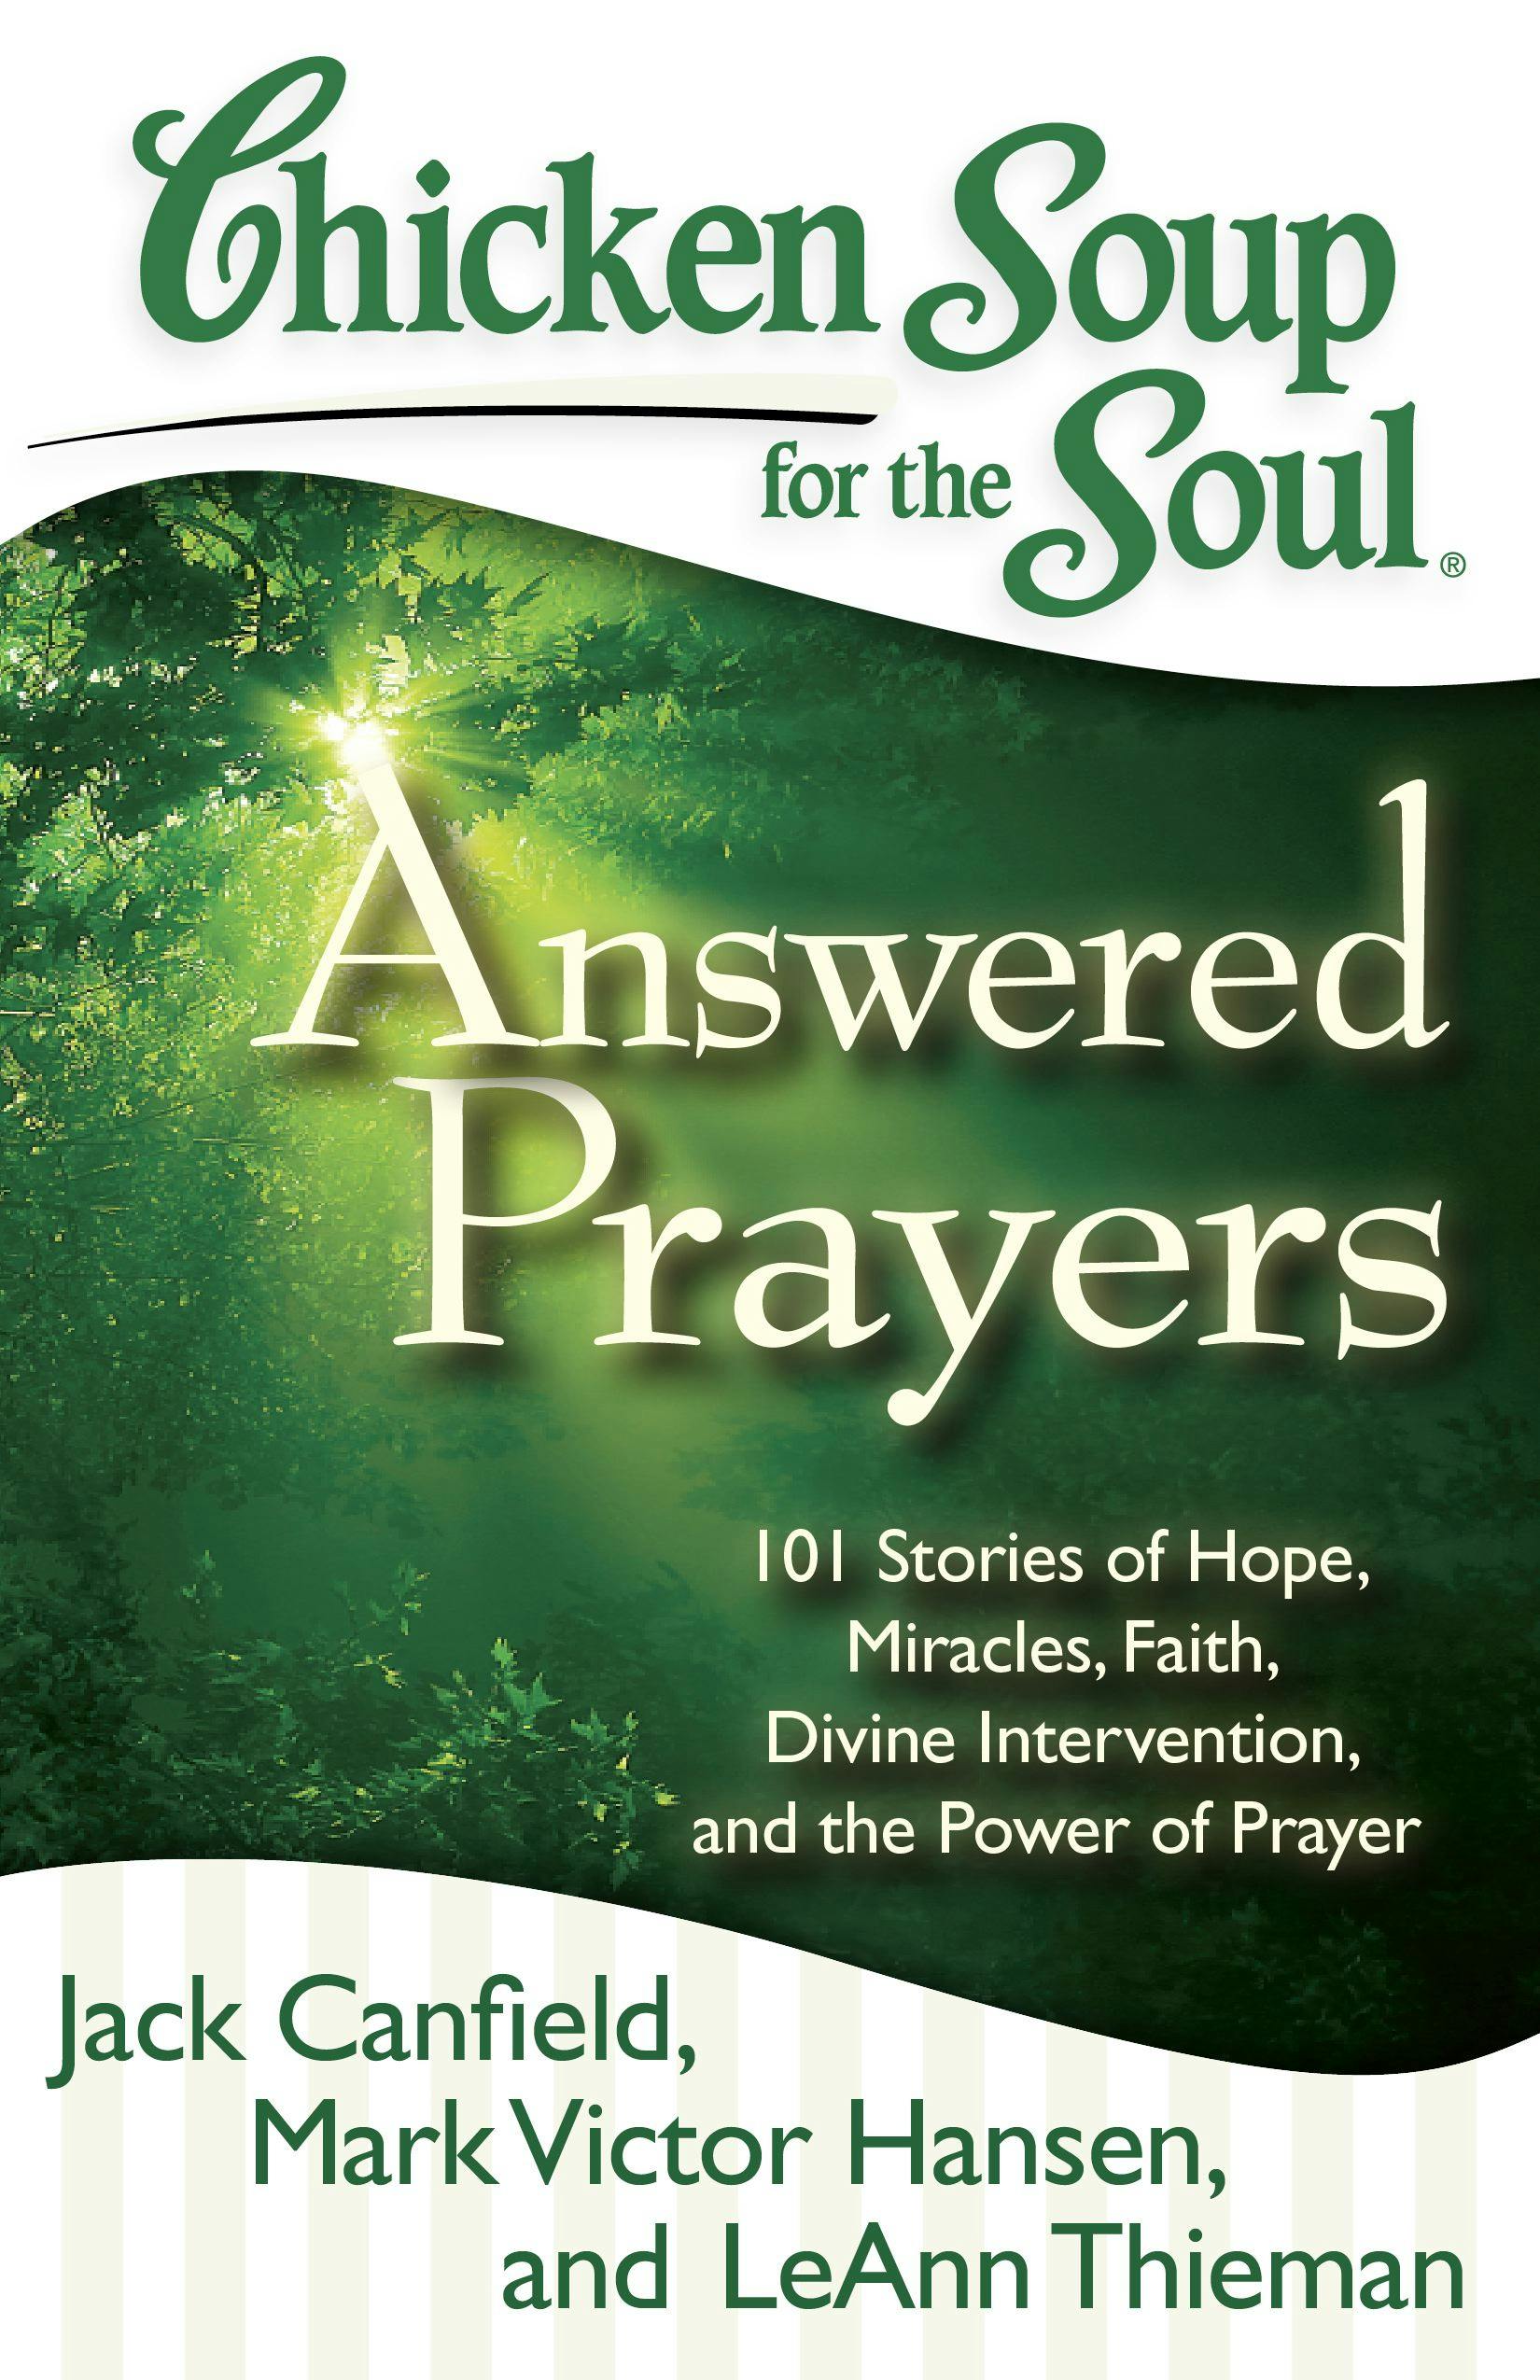 Chicken Soup for the Soul: Answered Prayers: 101 Stories of Hope, Miracles, Faith, Divine Intervention, and the Power of Prayer - Mark Victor Hansen, Jack Canfield, LeAnn Thieman